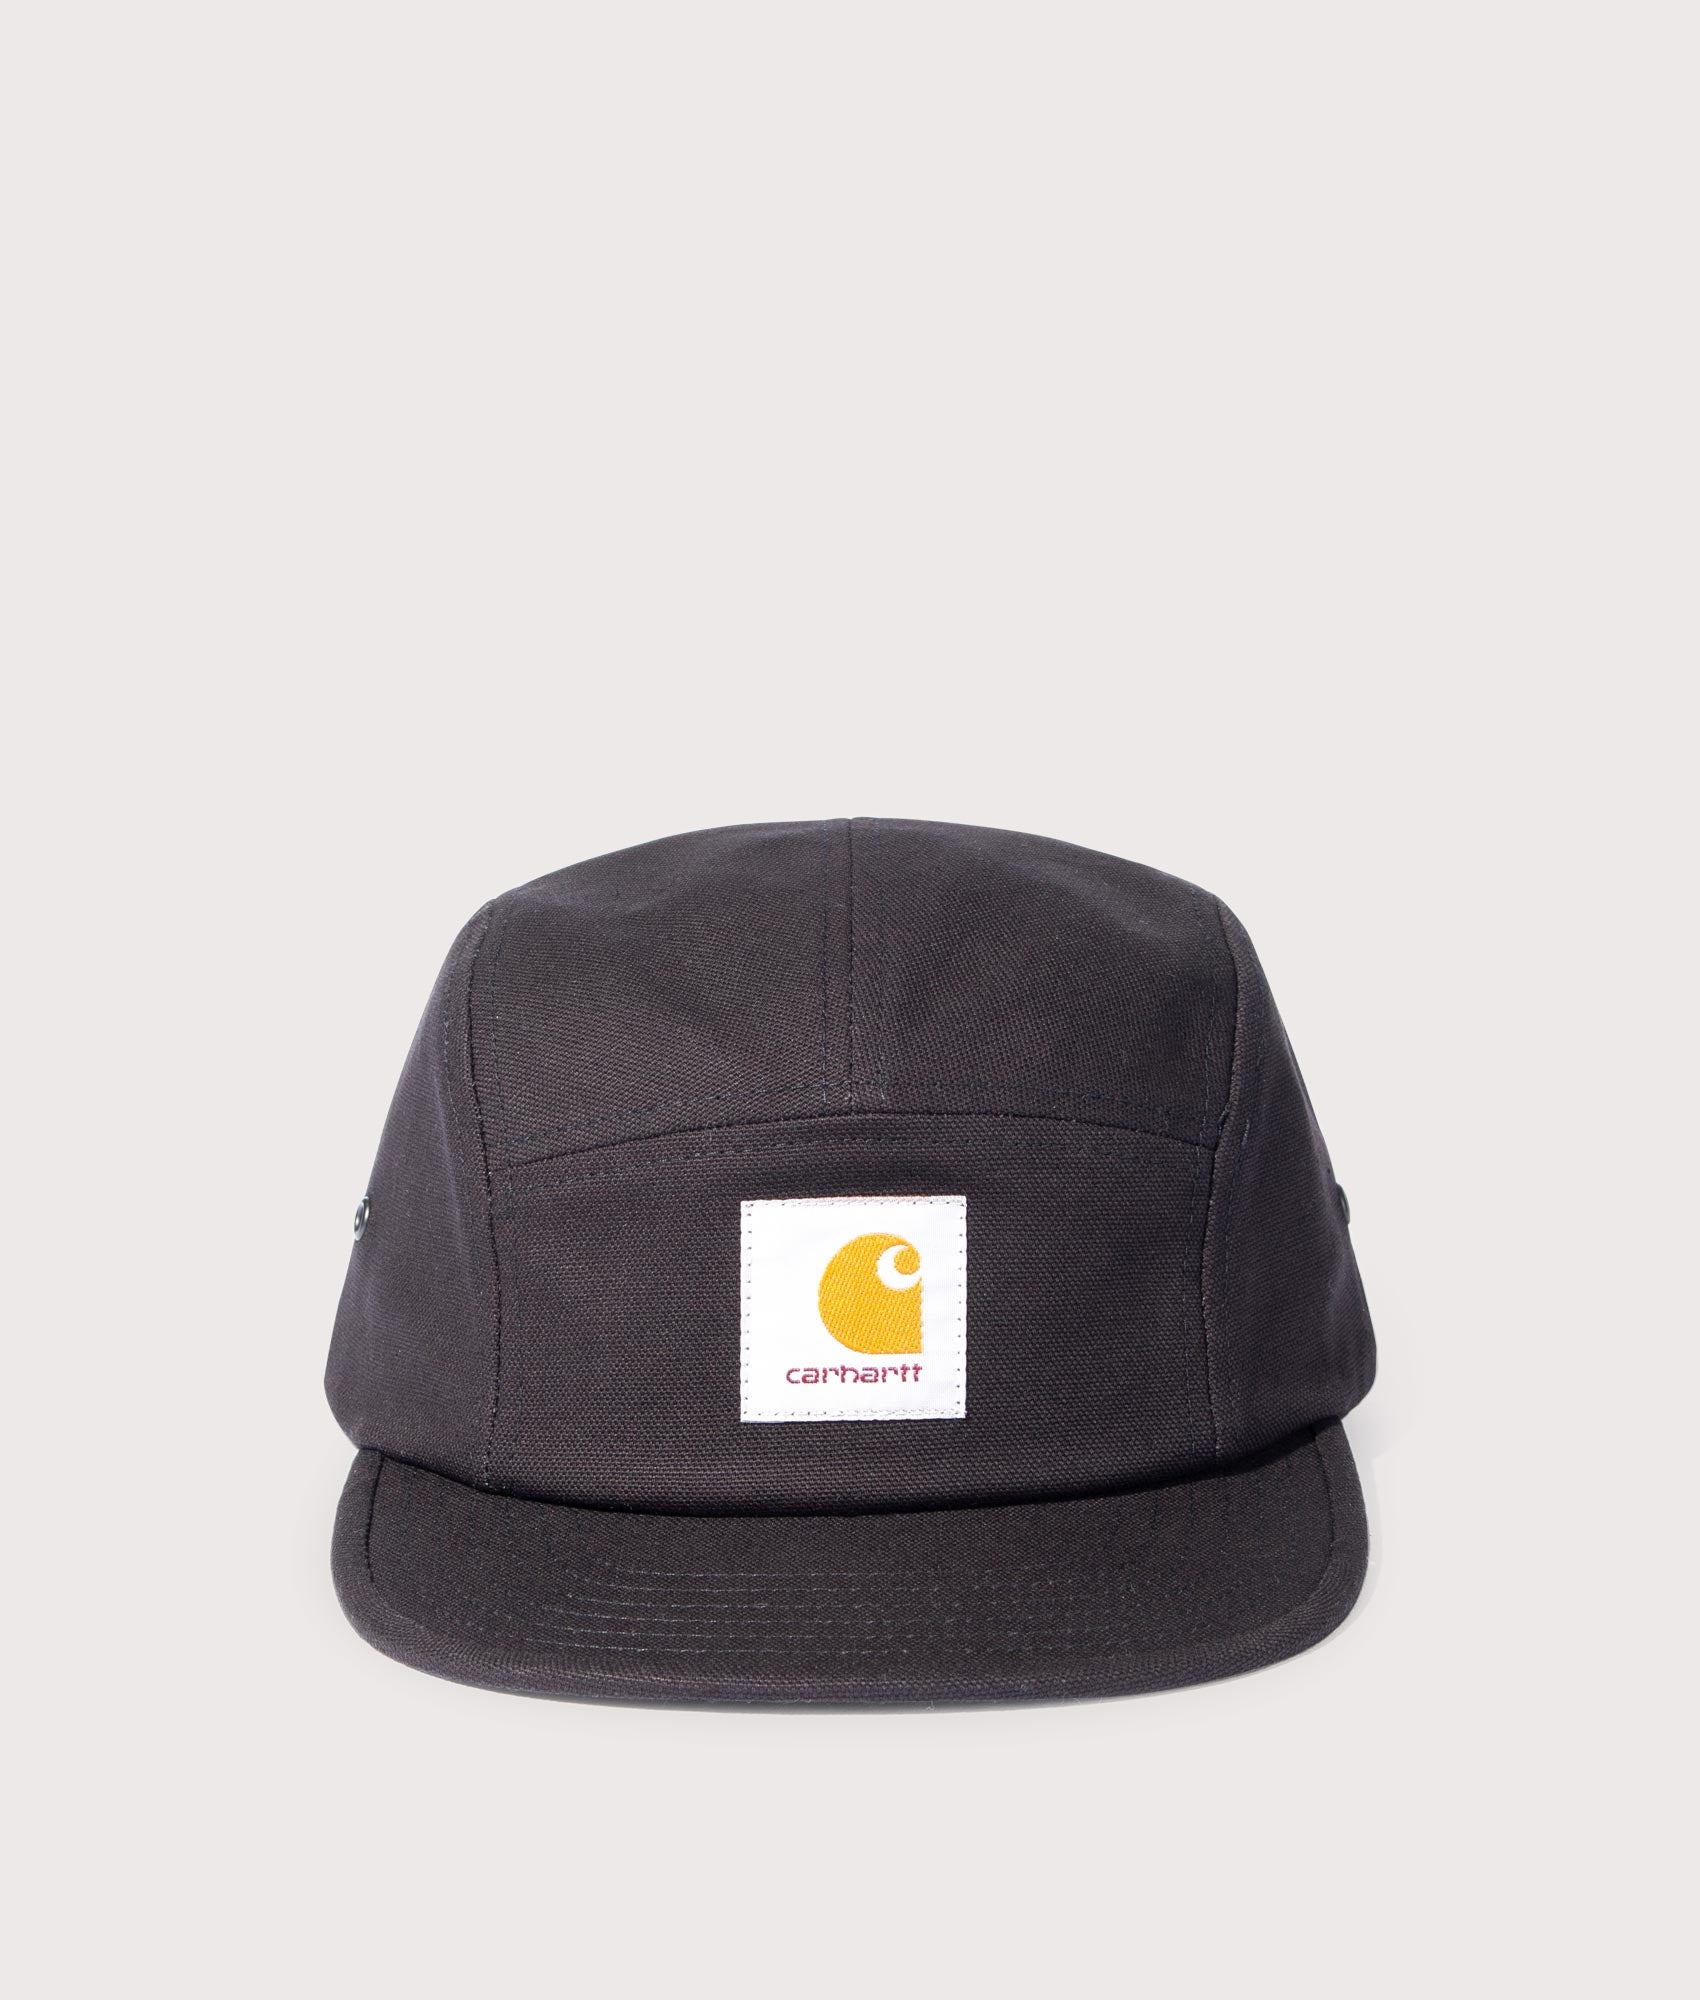 Carhartt WIP Mens Backley Cap - Colour: 89XX Black - Size: One Size